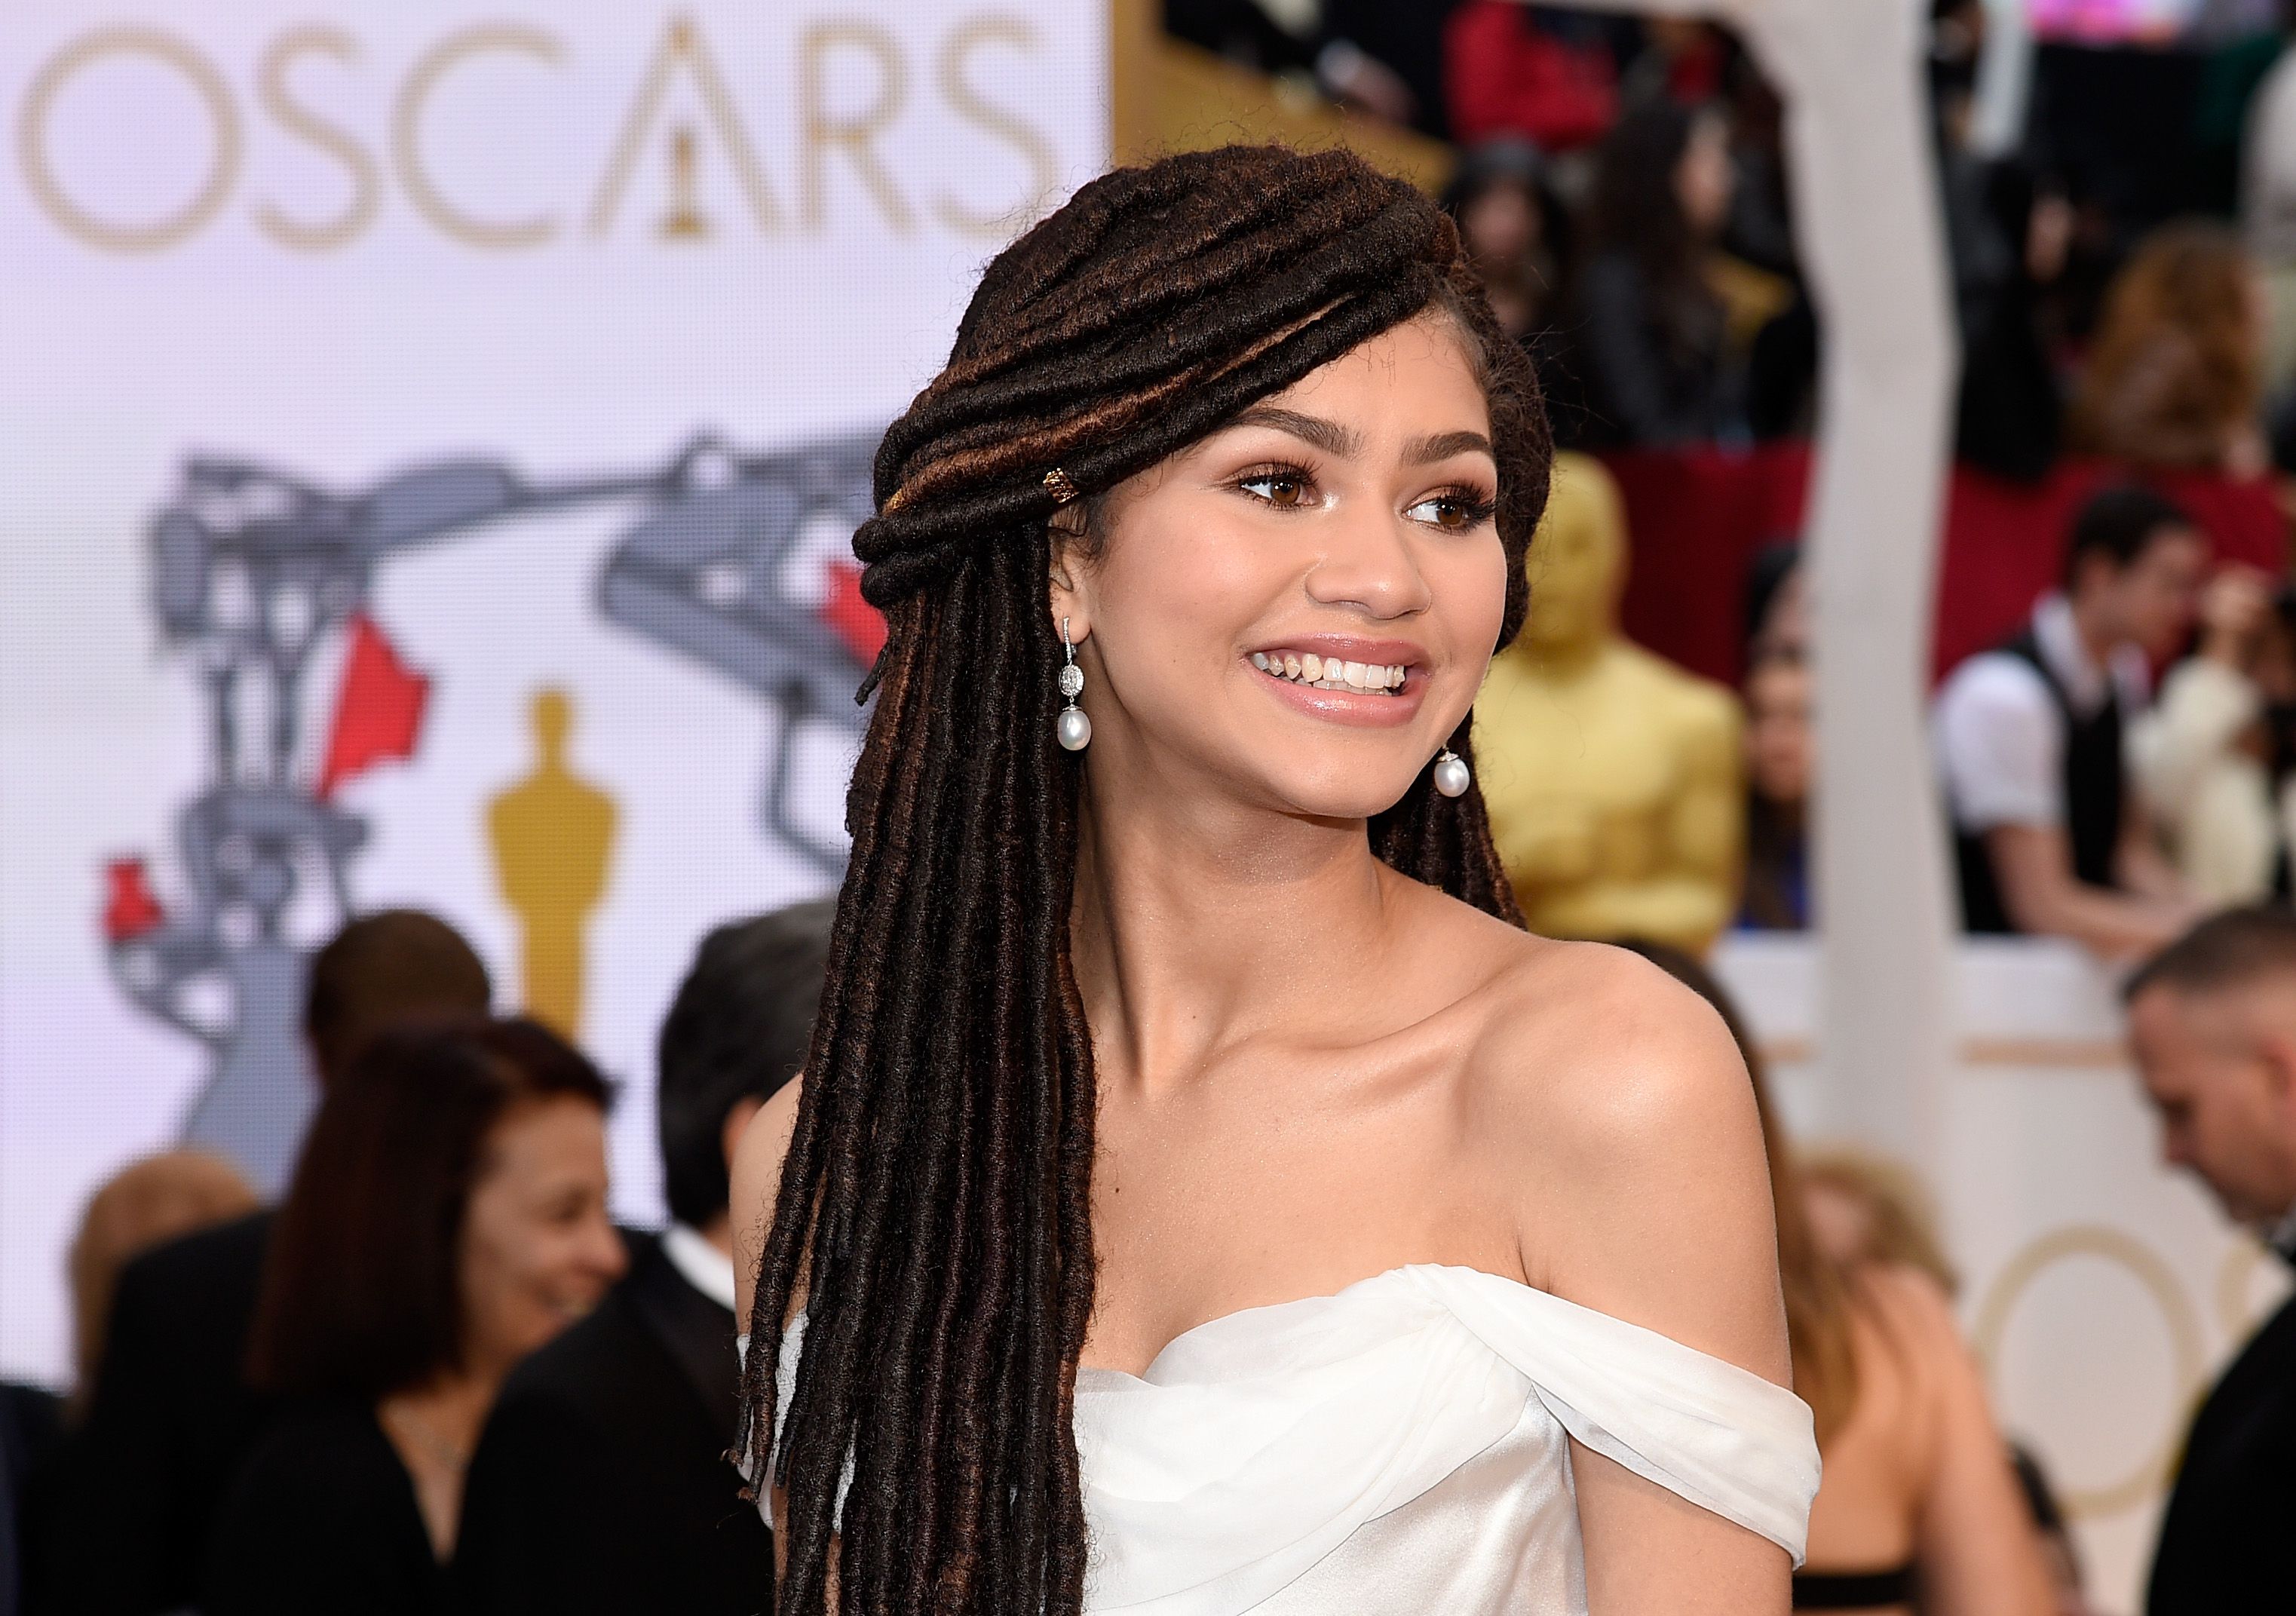 Zendaya attends the 87th Annual Academy Awards at Hollywood & Highland Center on February 22, 2015 in Hollywood, California. | Photo: Getty Images